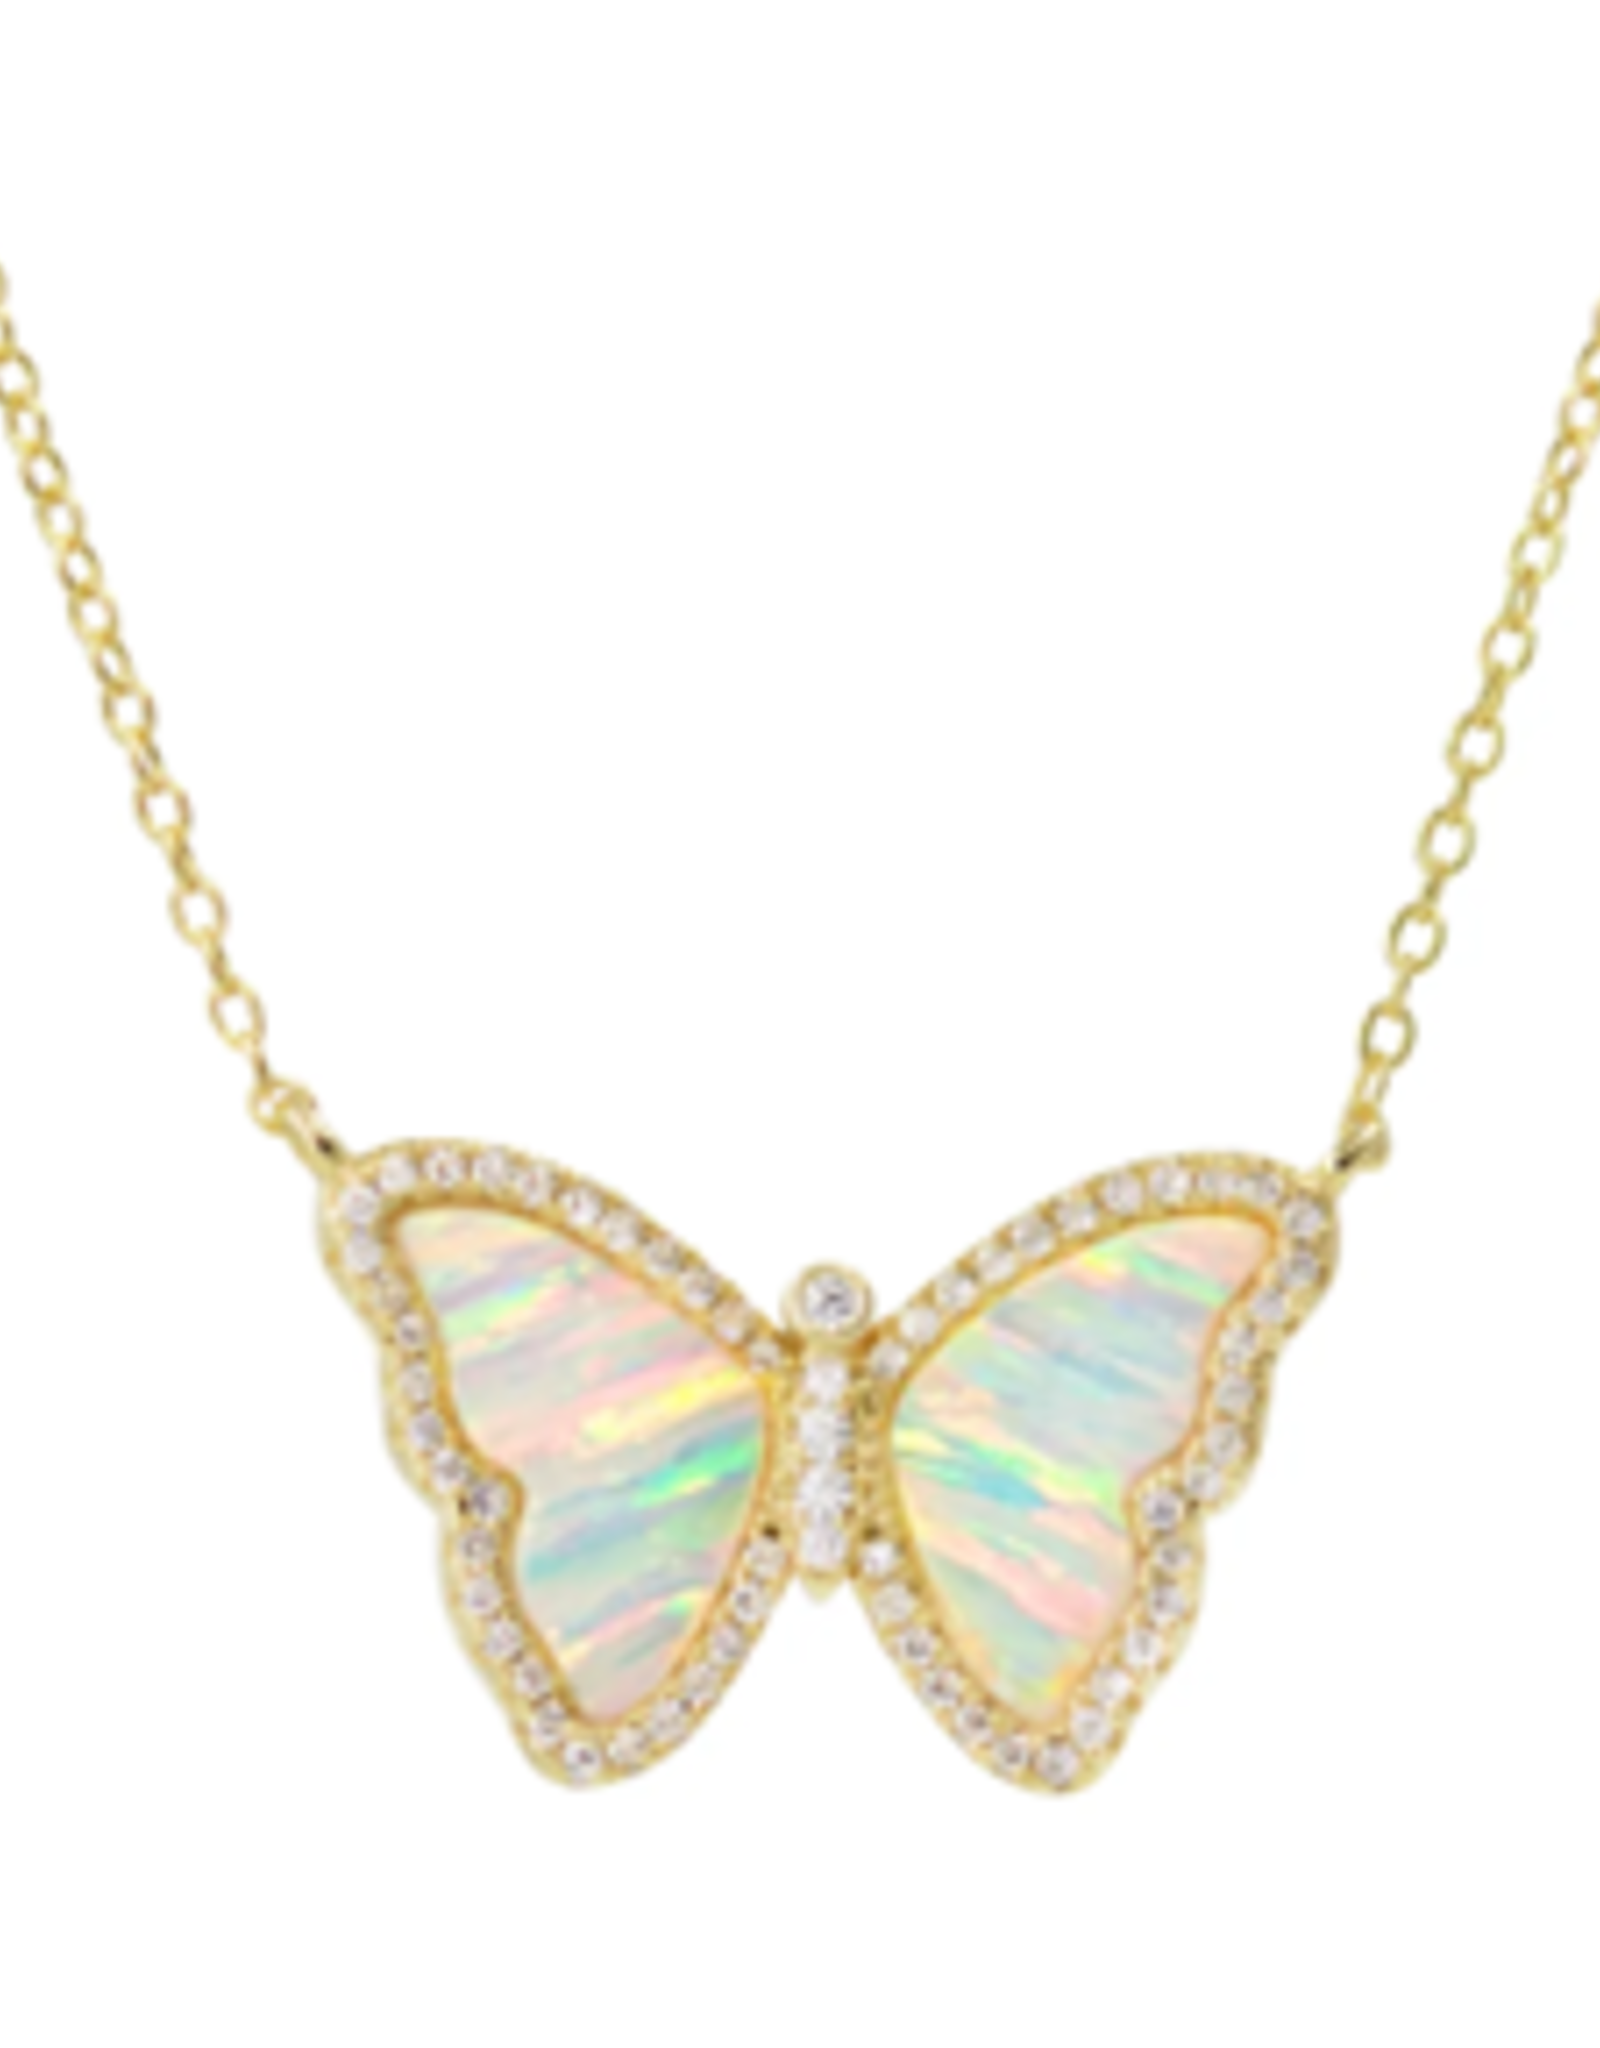 Kamaria Opal Butterfly Necklace with Crystals - Light Green Opal, Gold